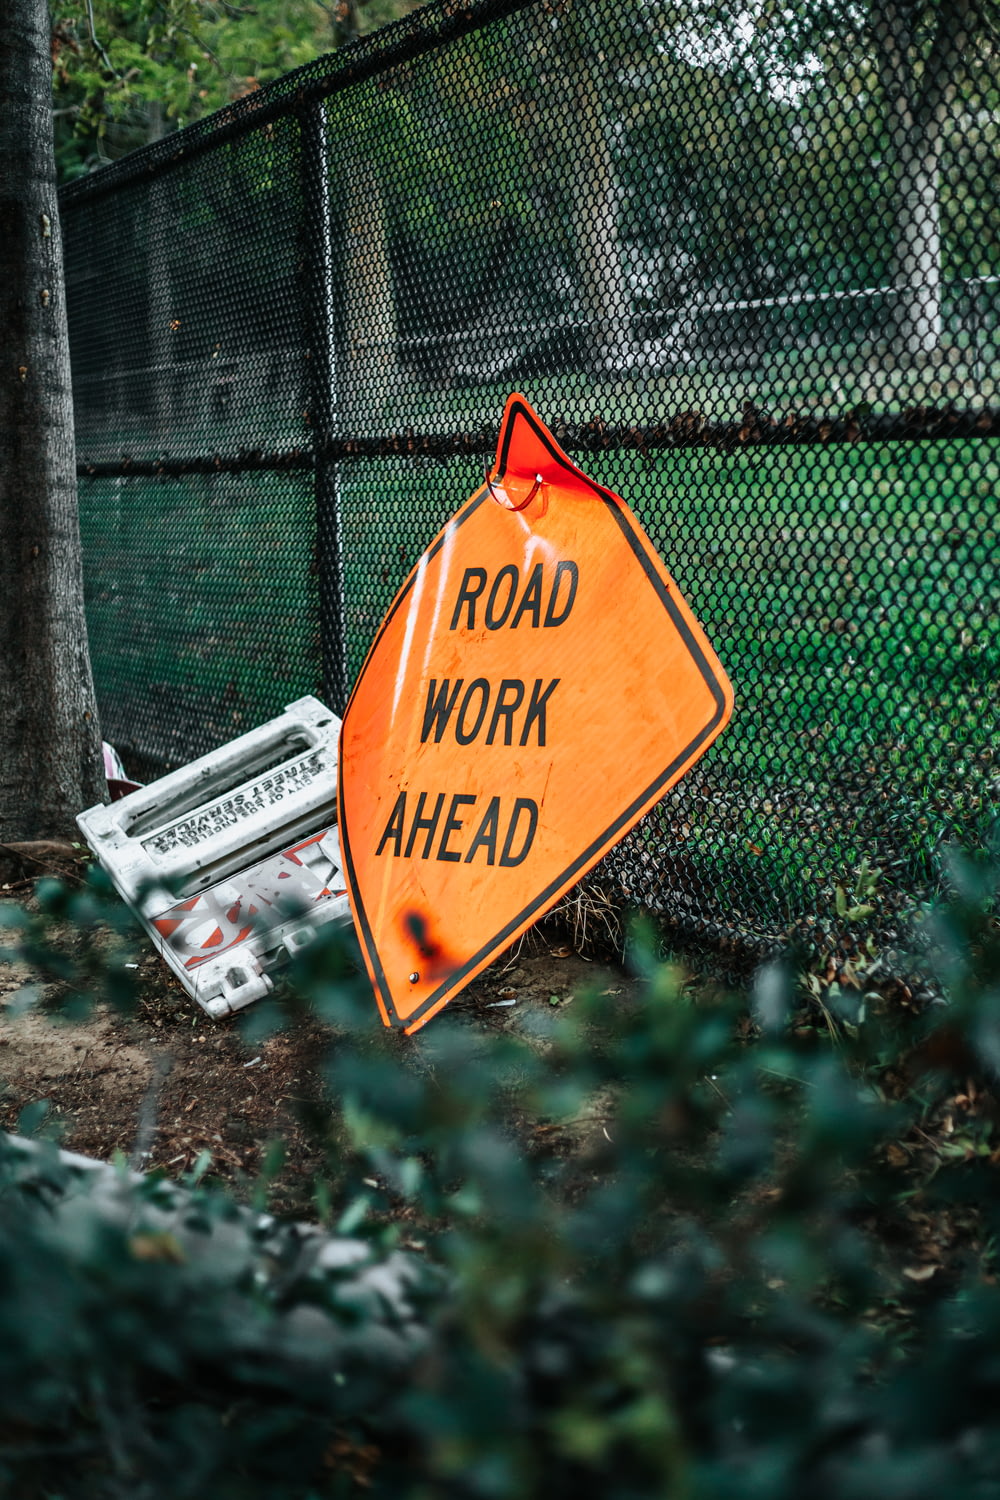 road work ahead signage leaning on chain link fence